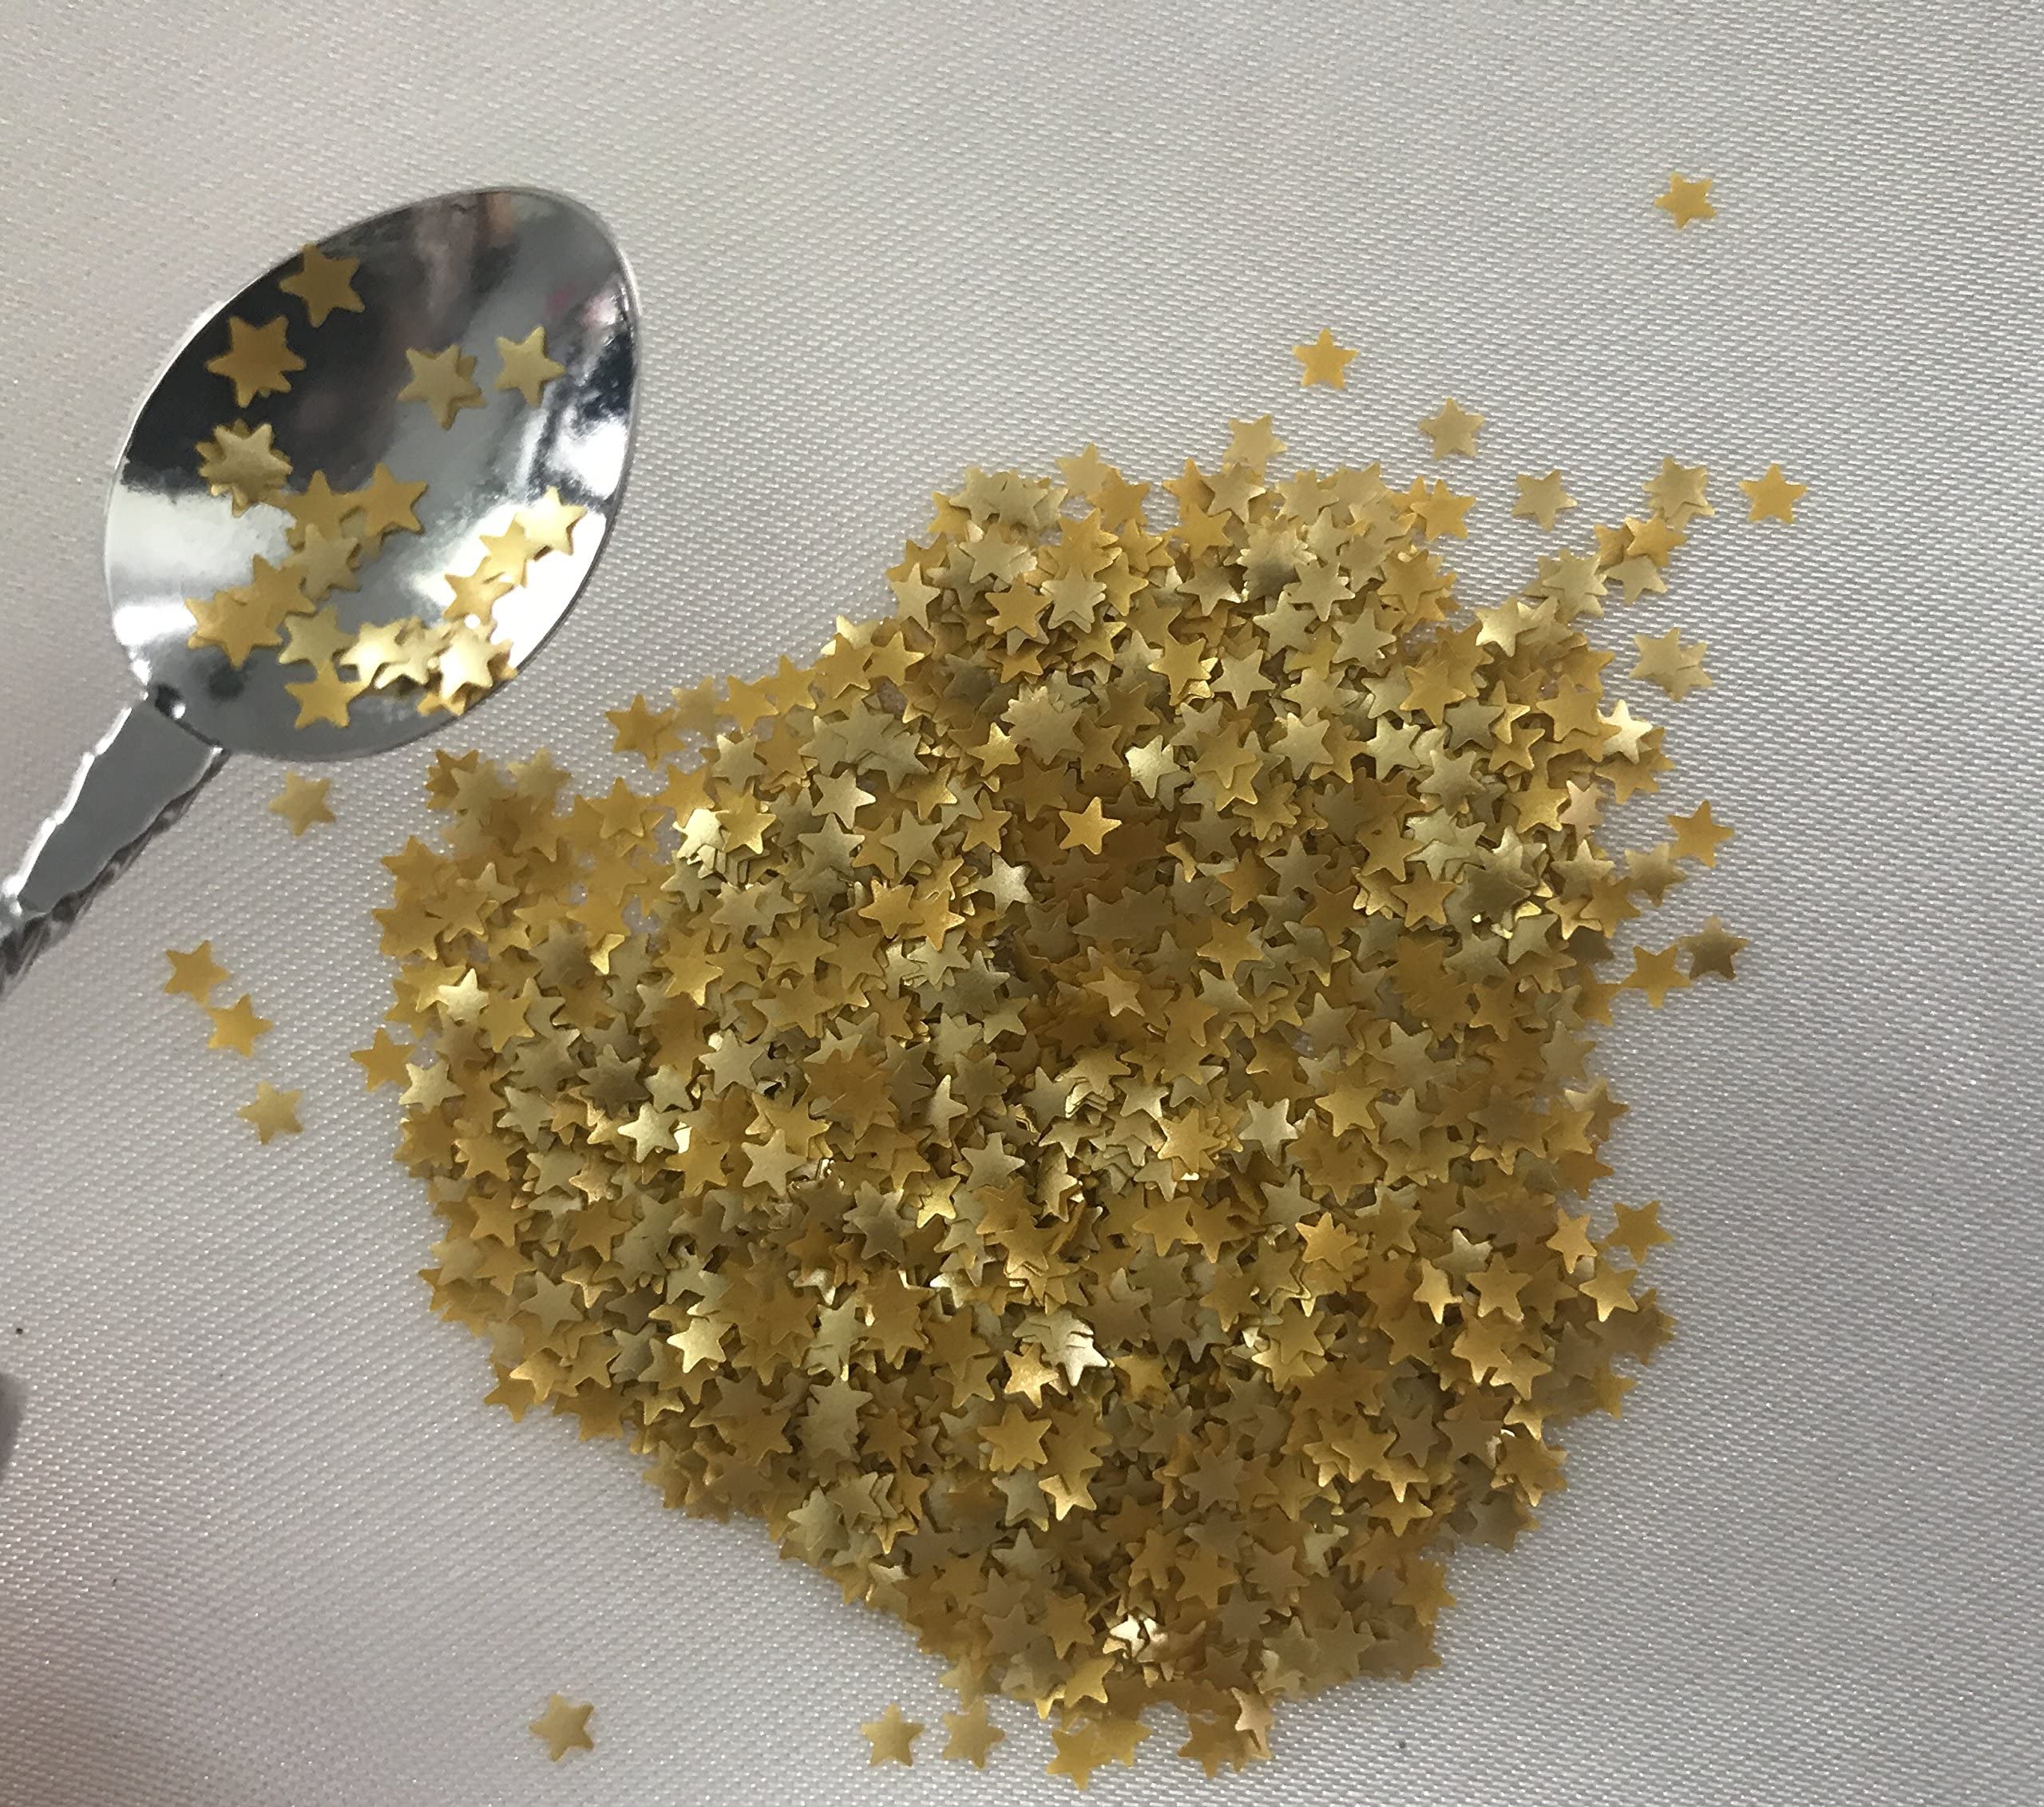 OH! SWEET ART EDIBLE GLITTER GOLD STARS 0.04 Ounce Oz. Use to cakes, cupcakes, flakes, cookies